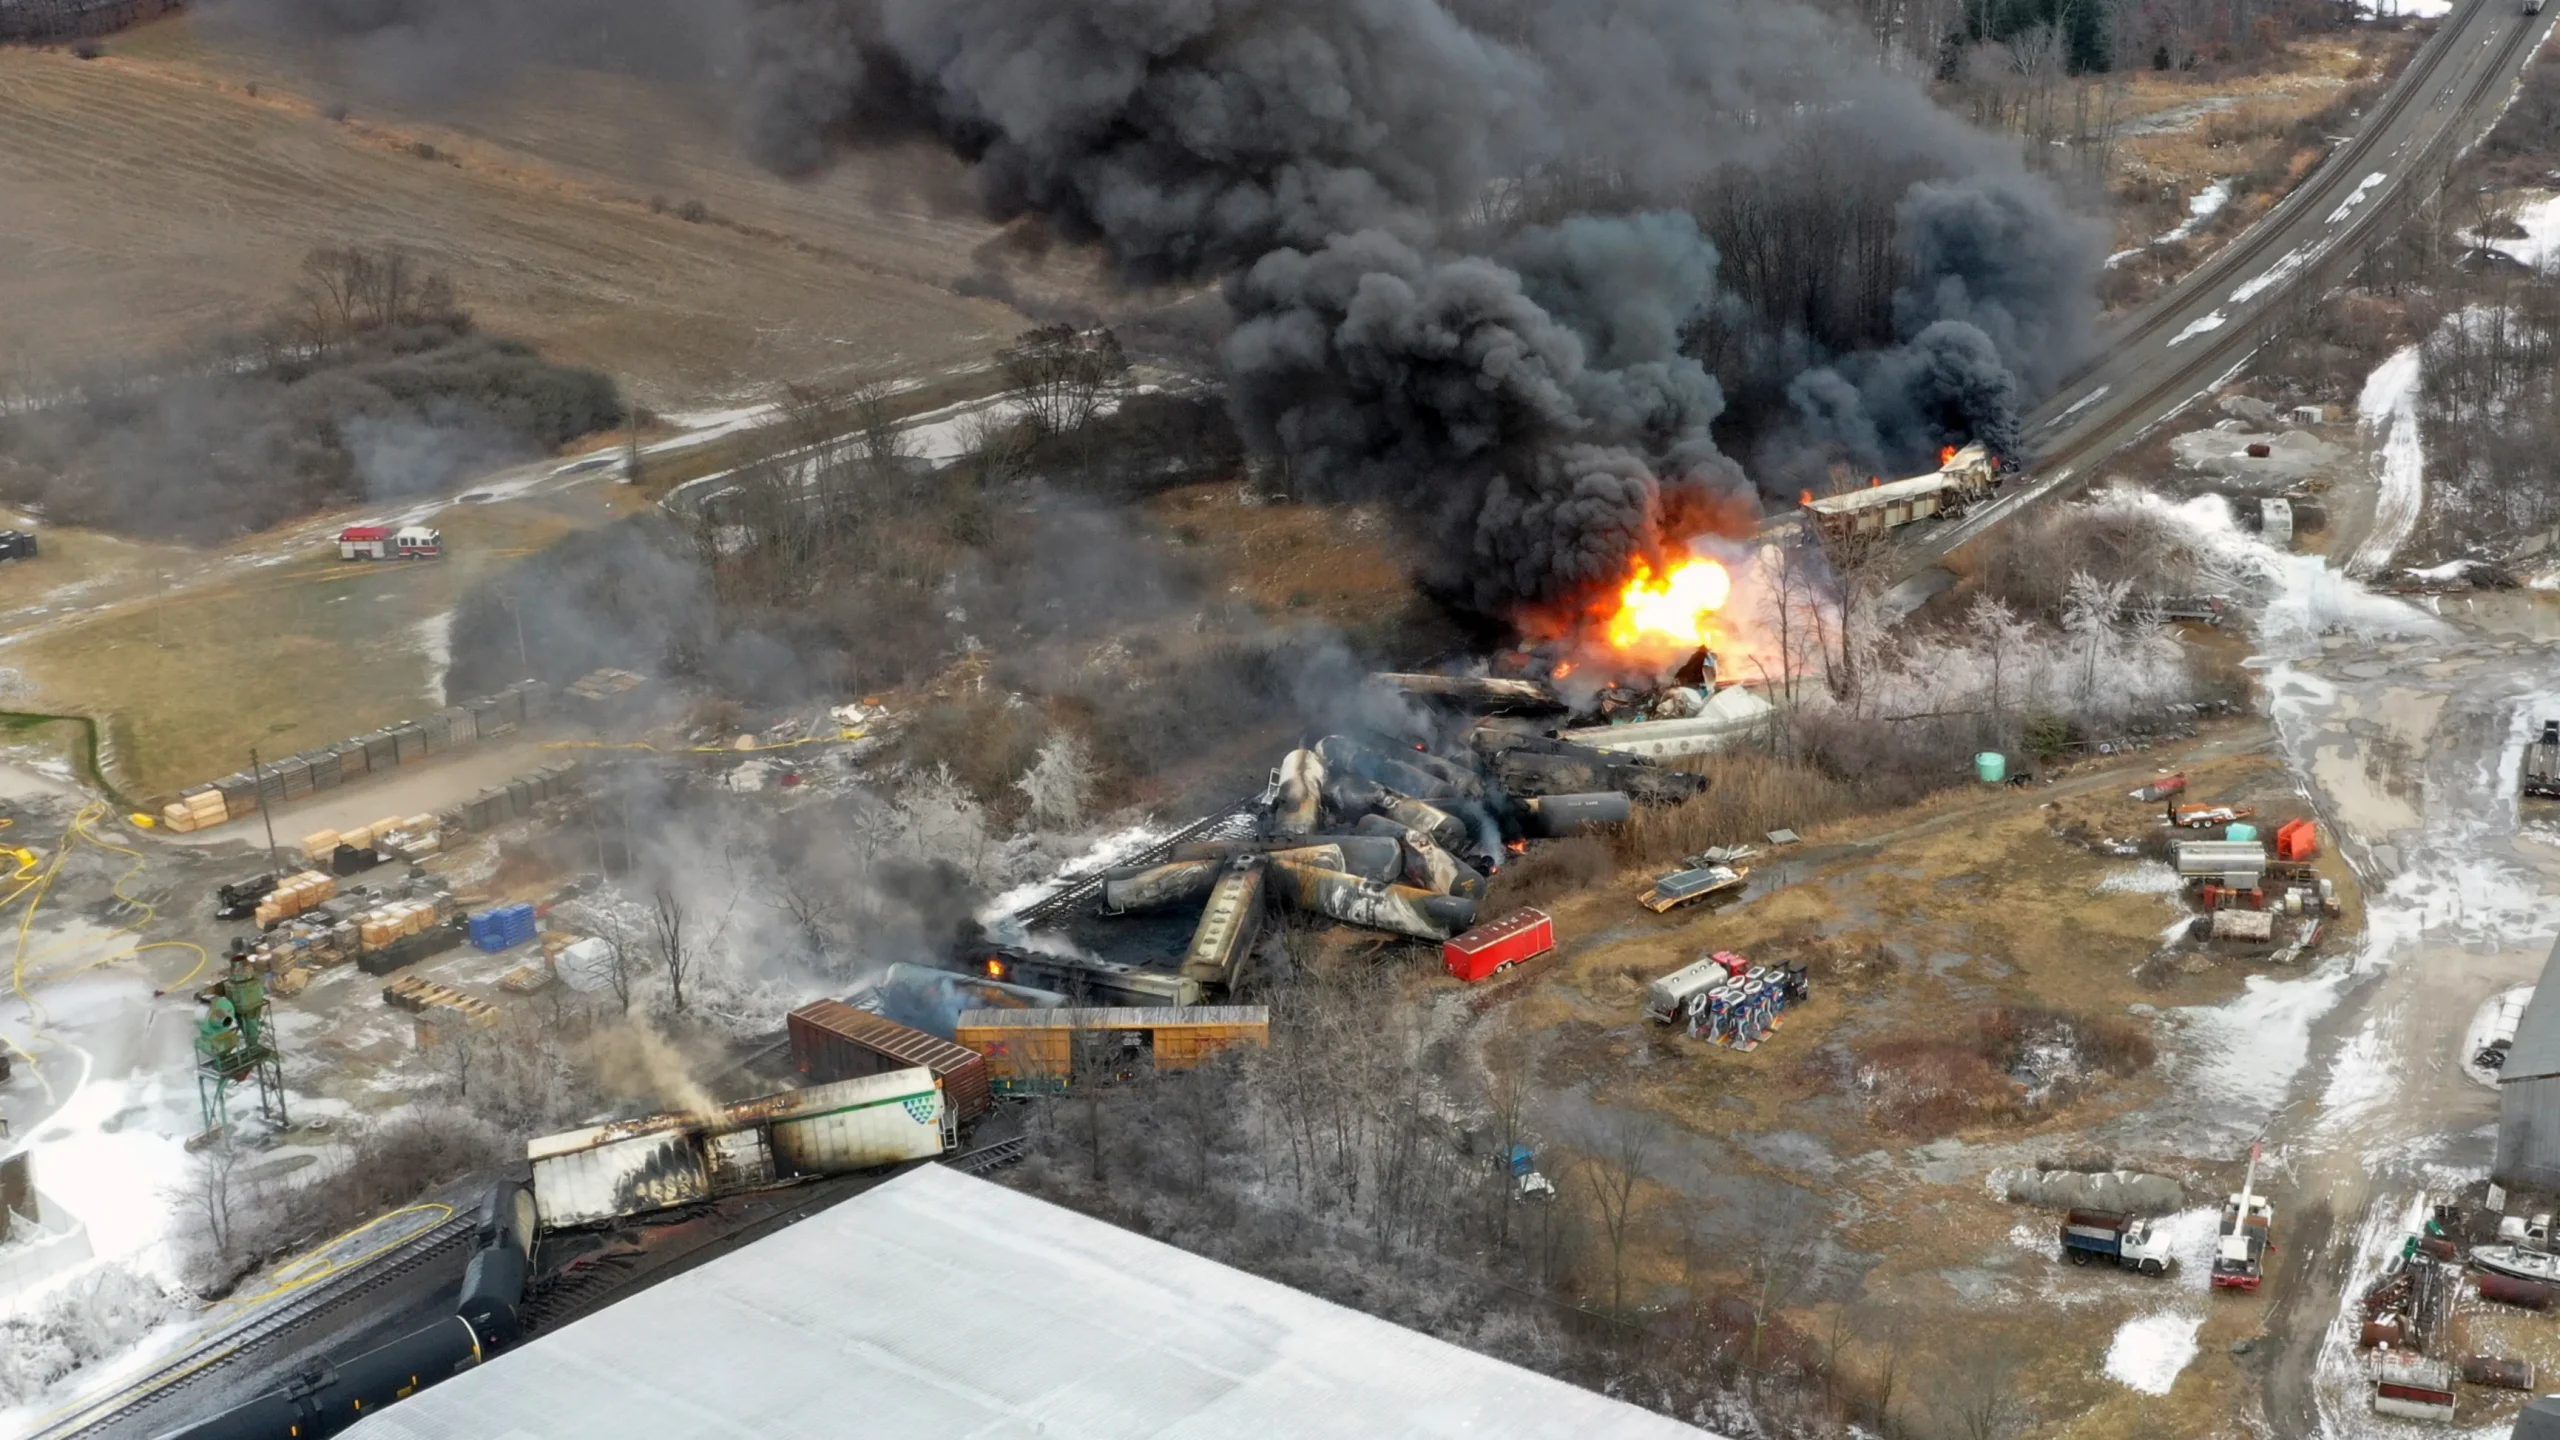 Our Local Aquifer Will Remain Unaffected By The Train Derailment in East Palestine, Ohio